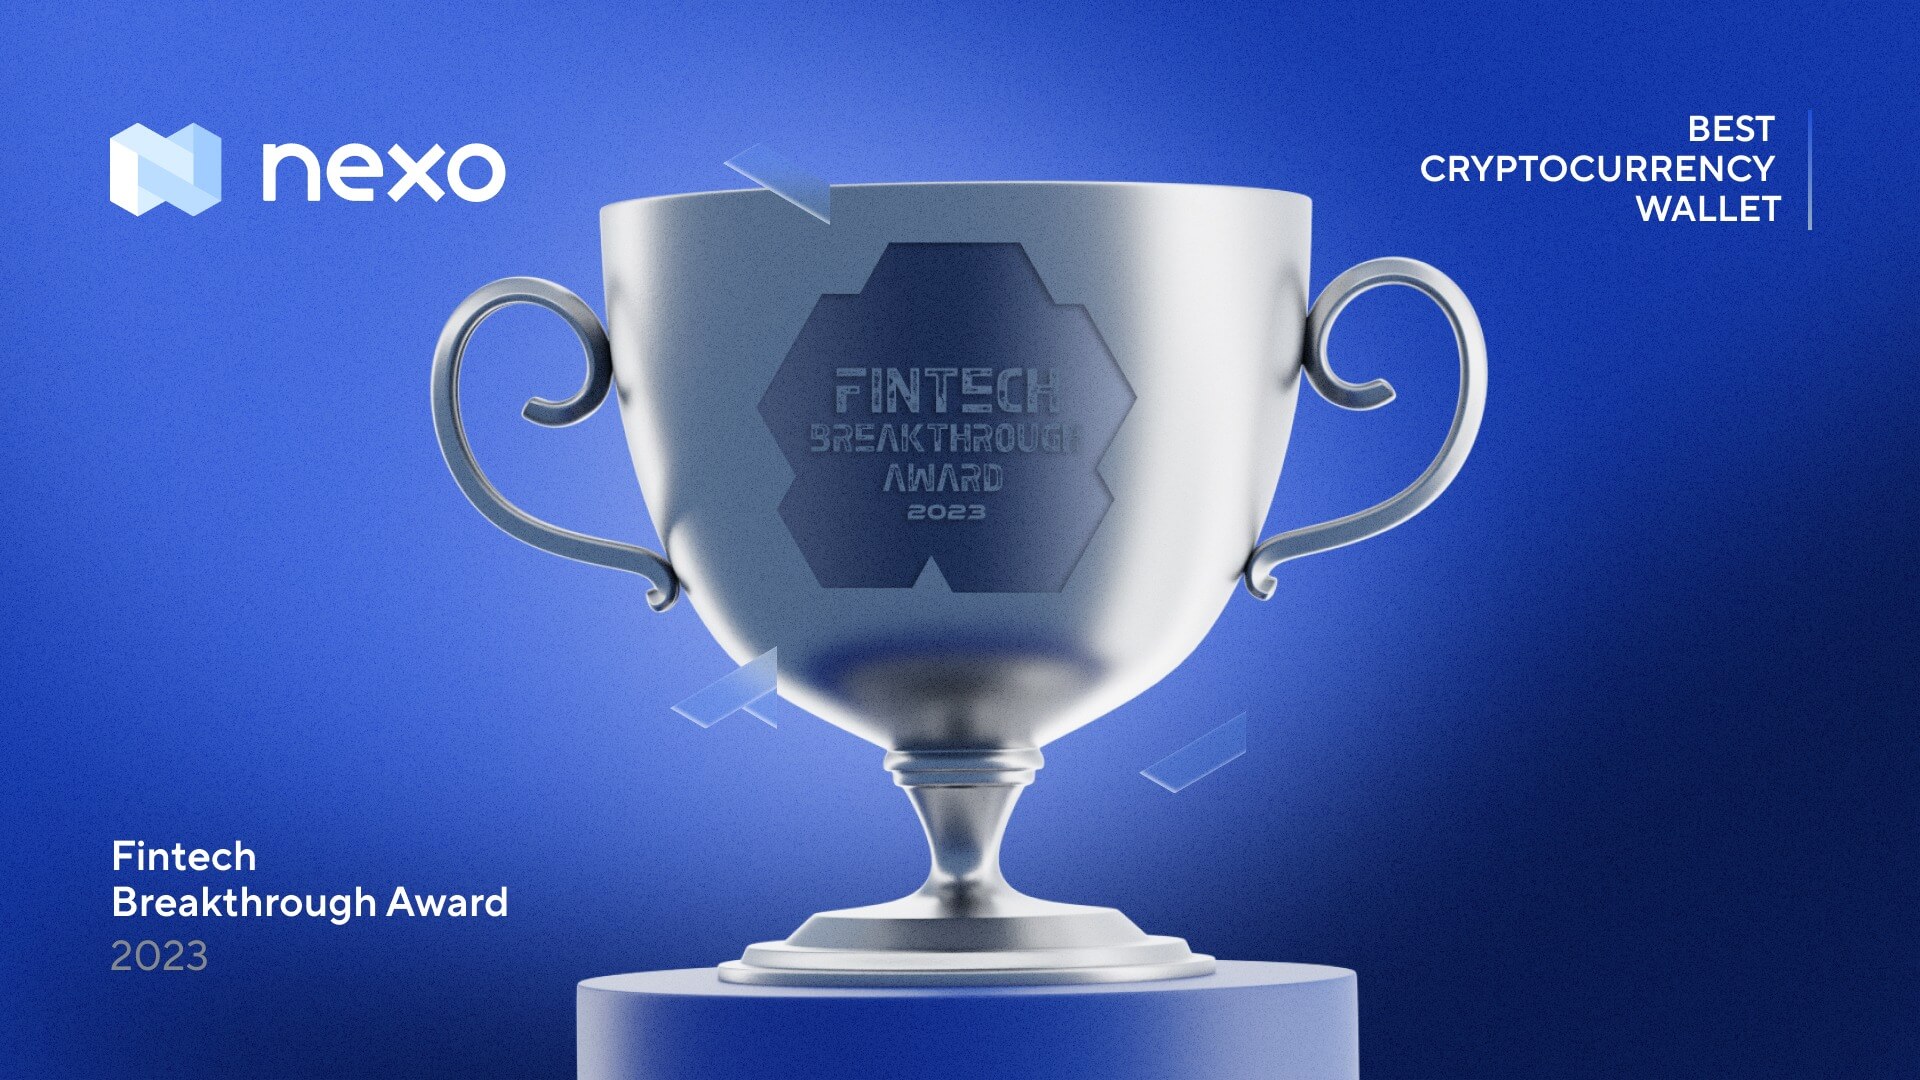 Nexo Named “Best Cryptocurrency Wallet” in FinTech Breakthrough Awards for New  Non-Custodial Wallet